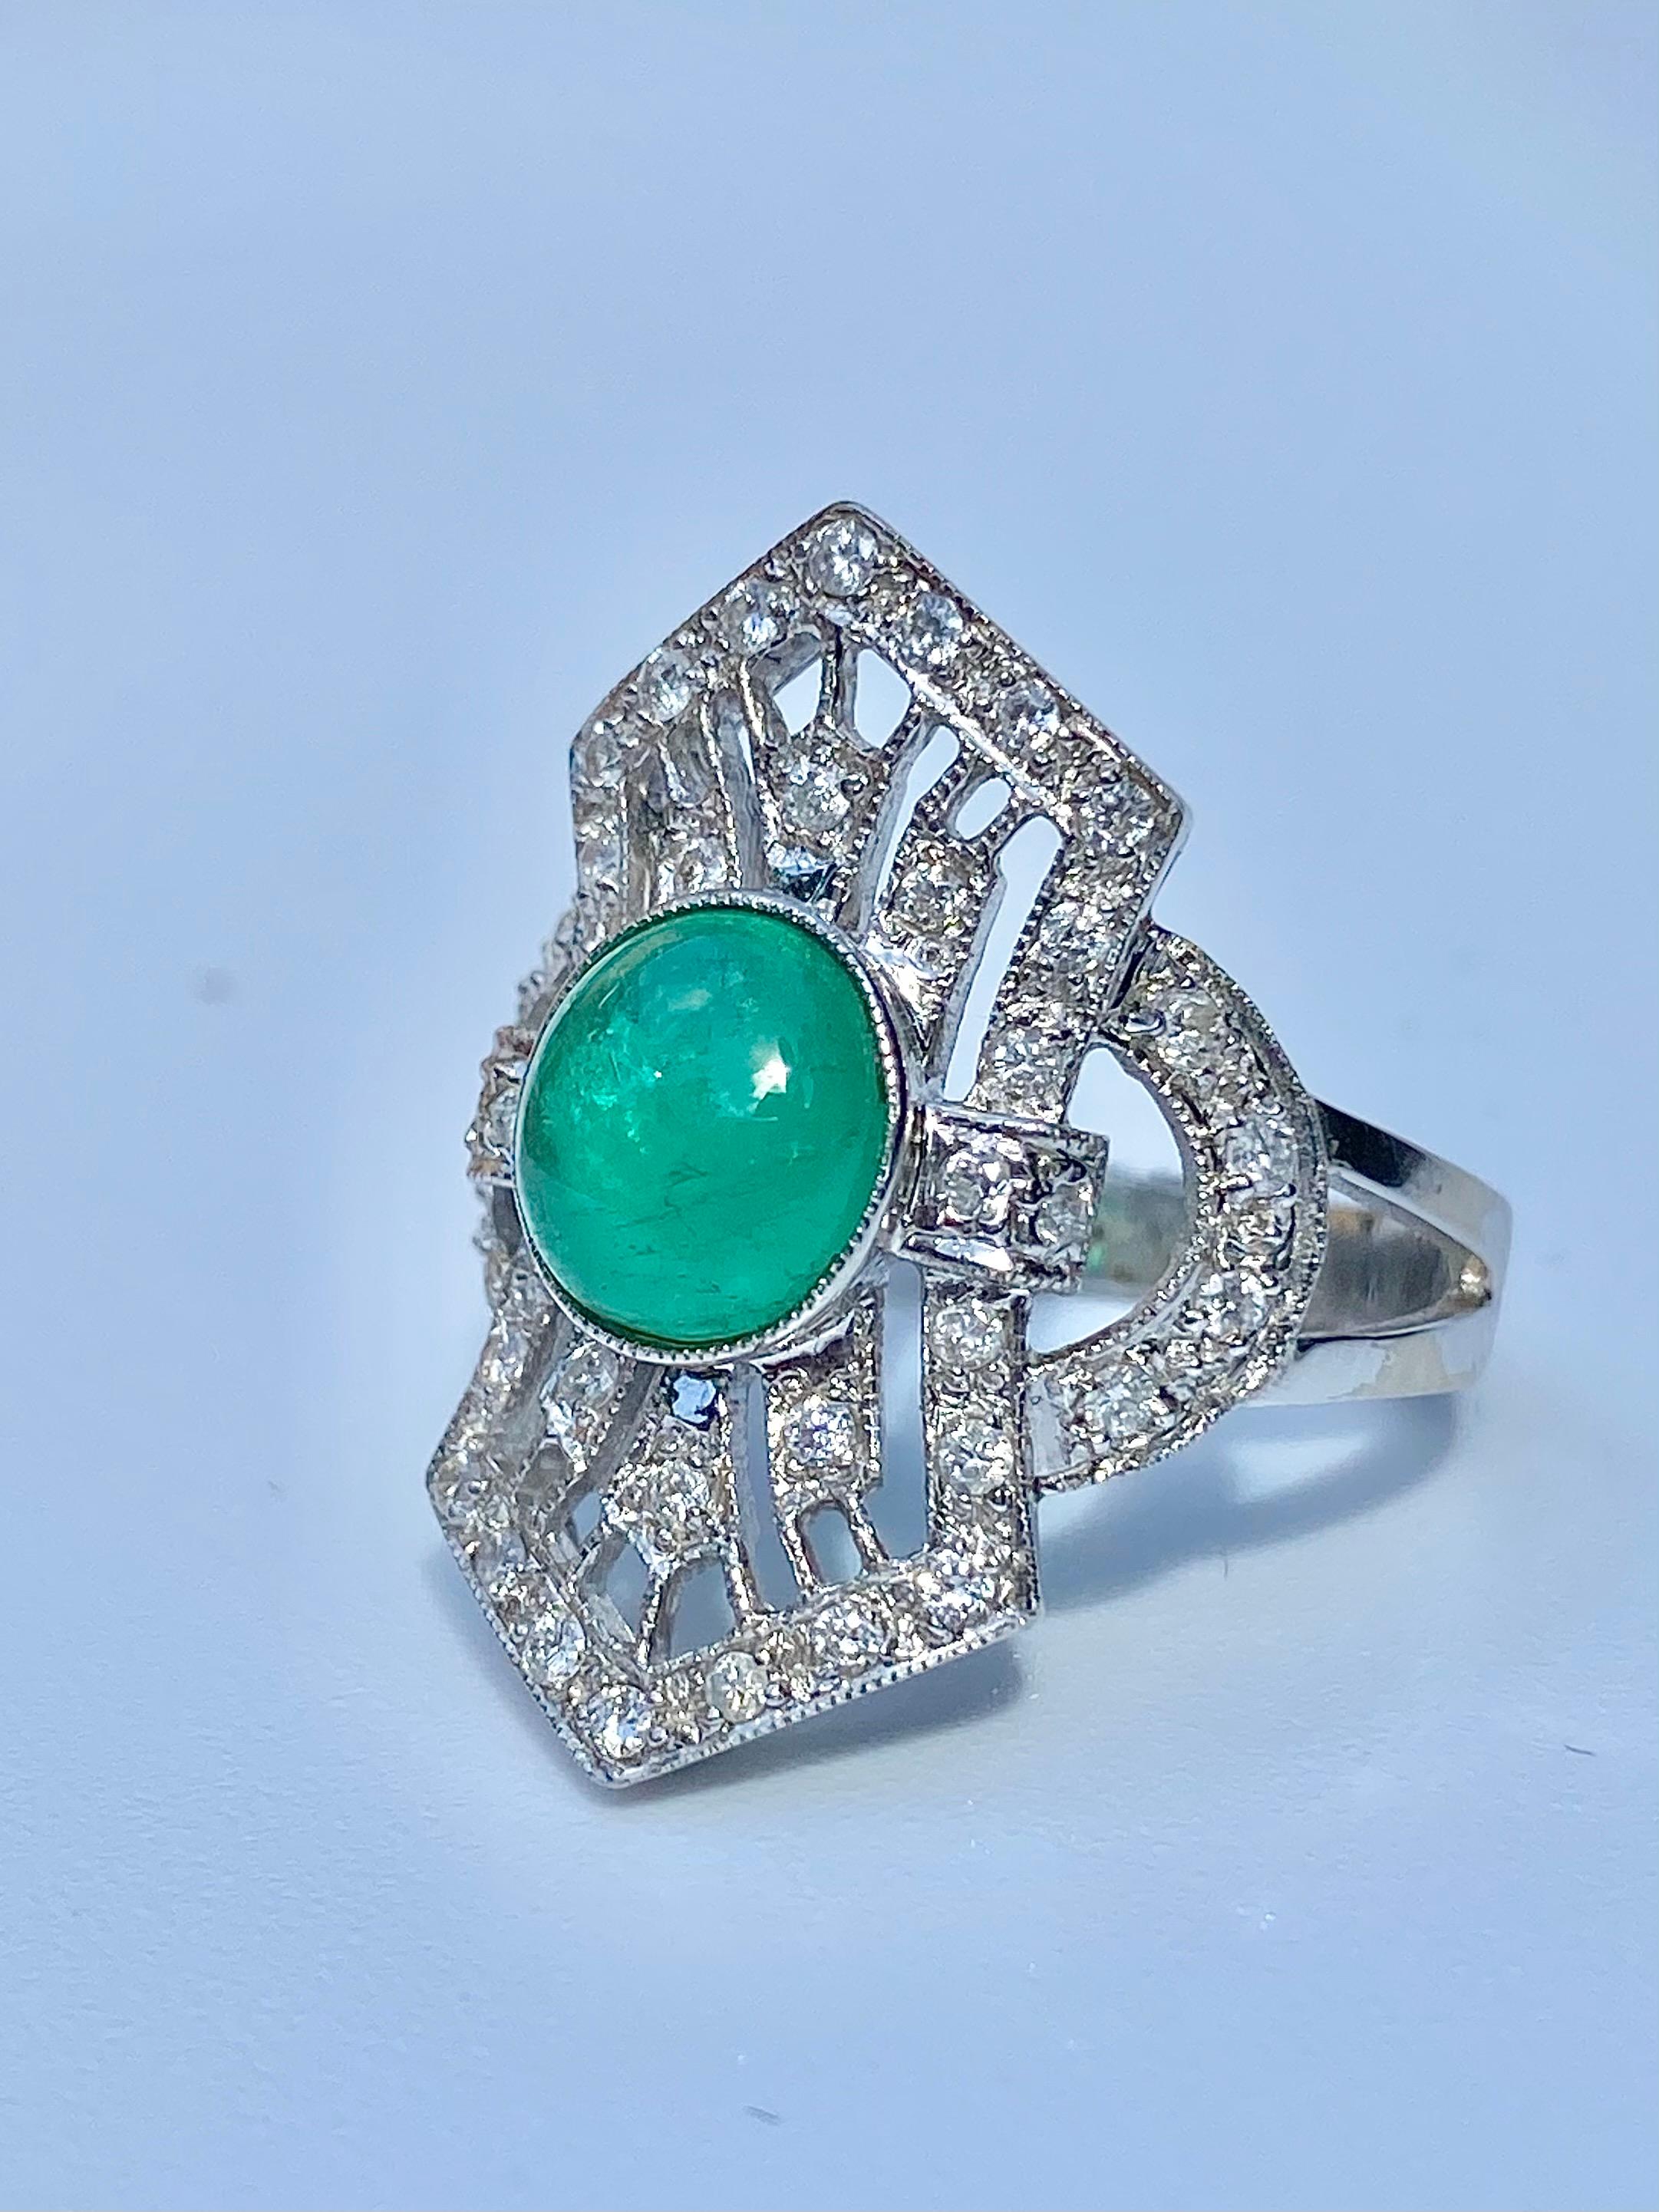 Centering a Cabochon-Cut 1.40 Carat Green Colombian Emerald, accented by an additional 0.66 Carats of Round-Brilliant Cut Diamonds, and set in 14K White Gold, this vintage classic is a tribute to a bygone era of jewelry craftsmanship. 

Ring